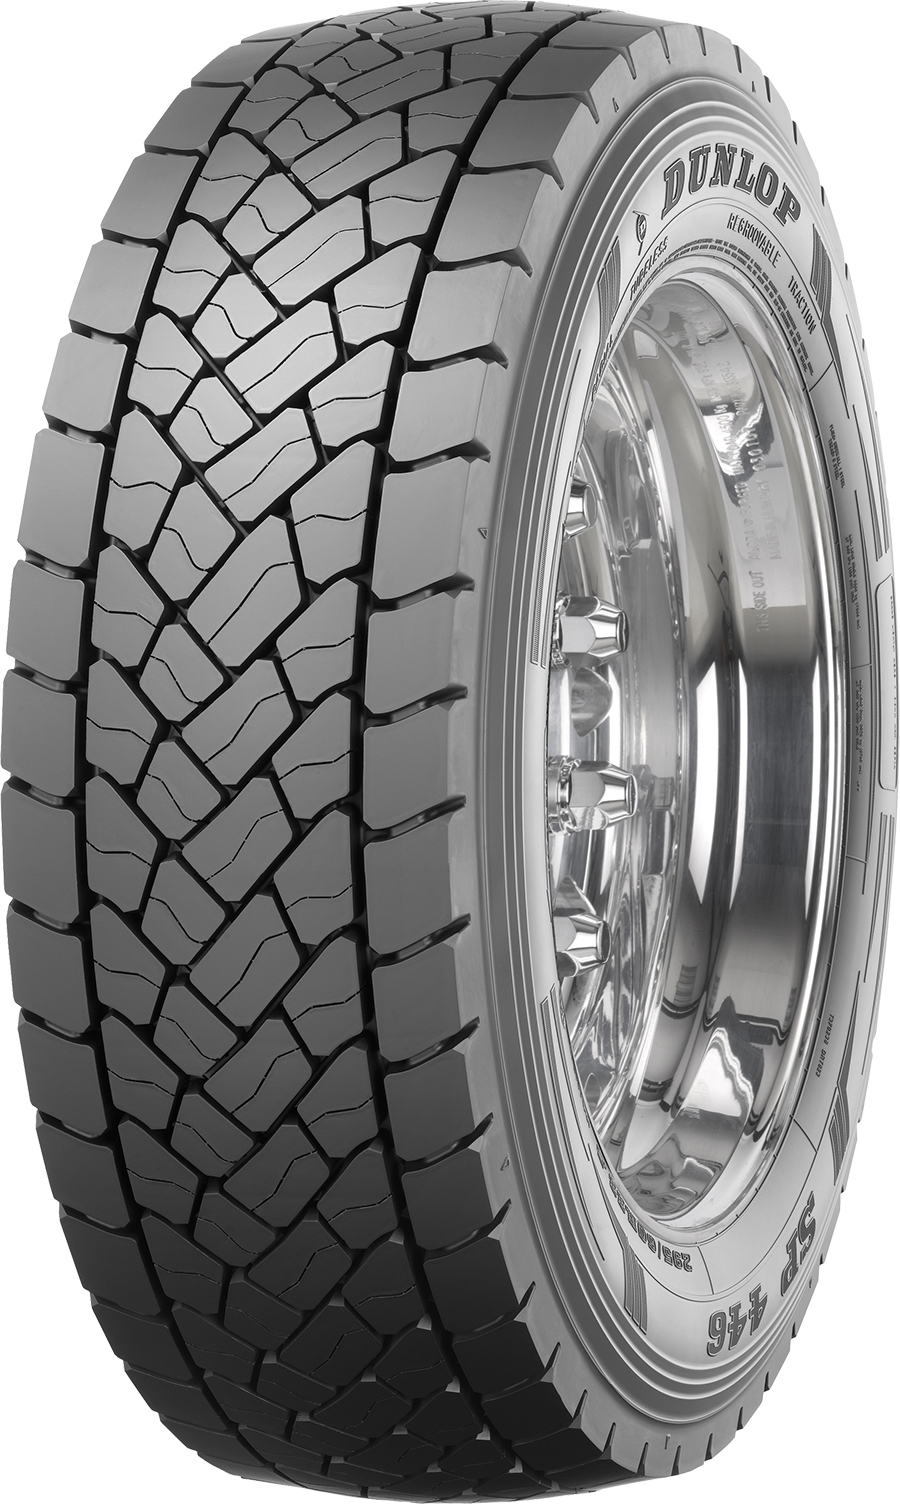 product_type-heavy_tires DUNLOP SP446 205/75 R17.5 124M